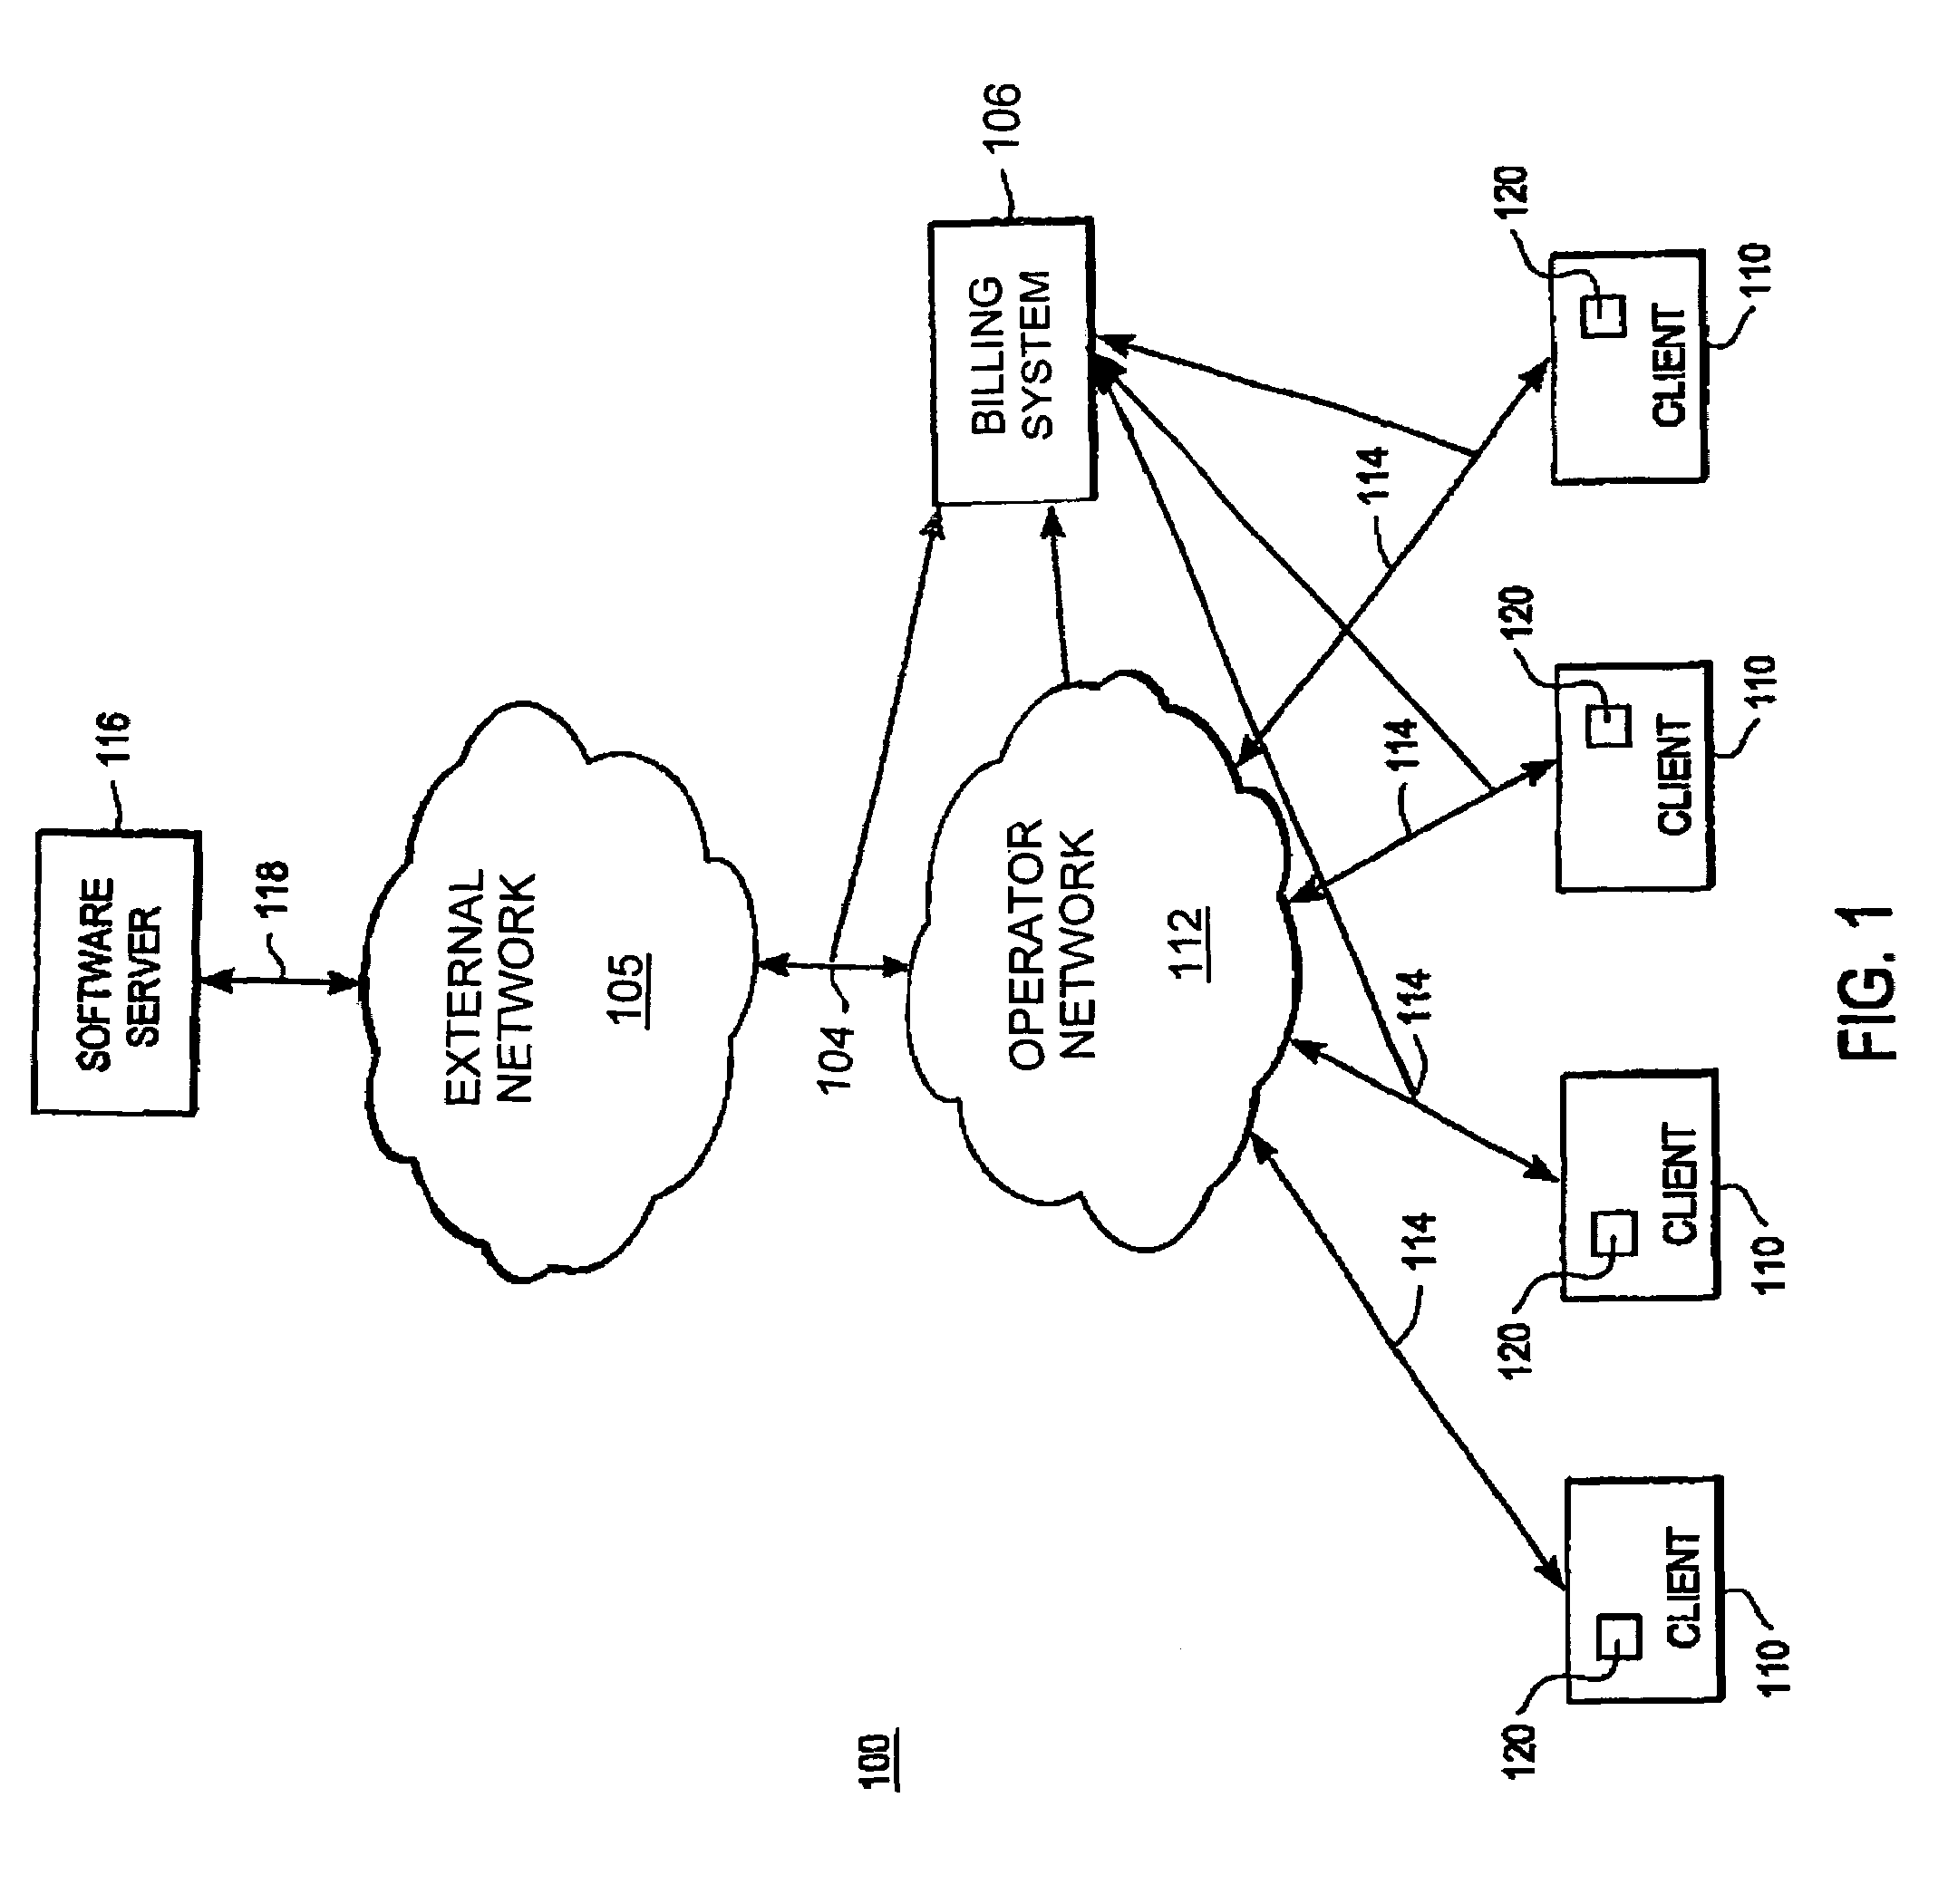 Cost control system for access to mobile services